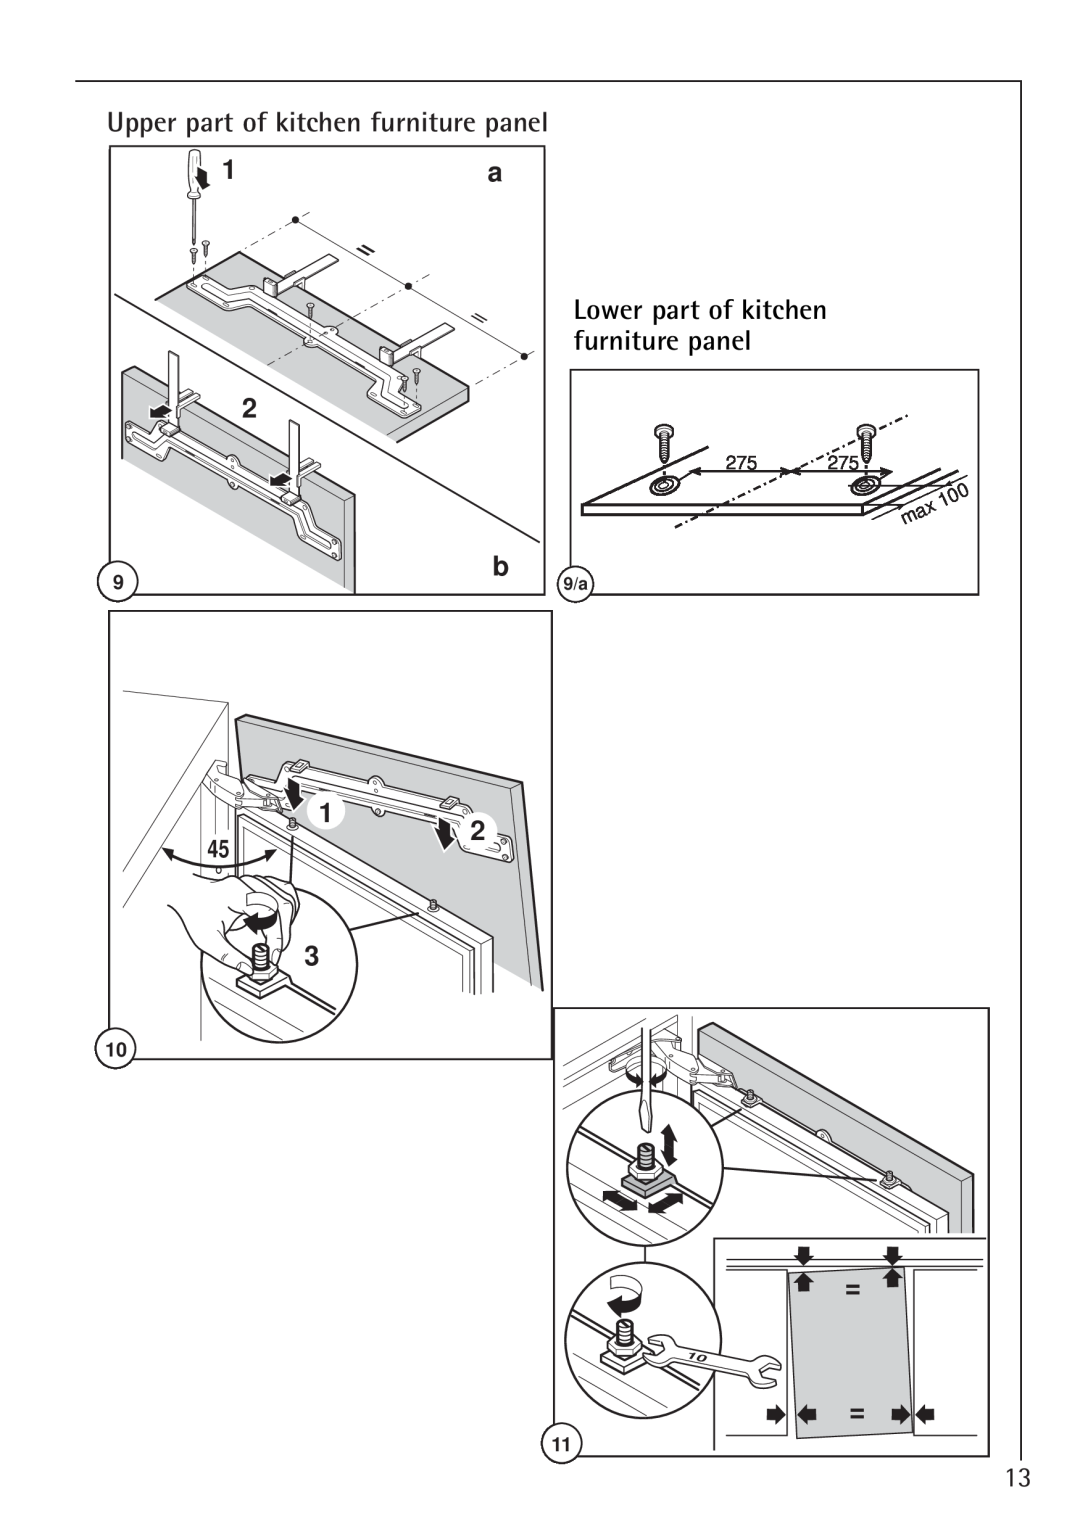 Electrolux 66050i installation instructions Upper part of kitchen furniture panel, Lower part of kitchen 